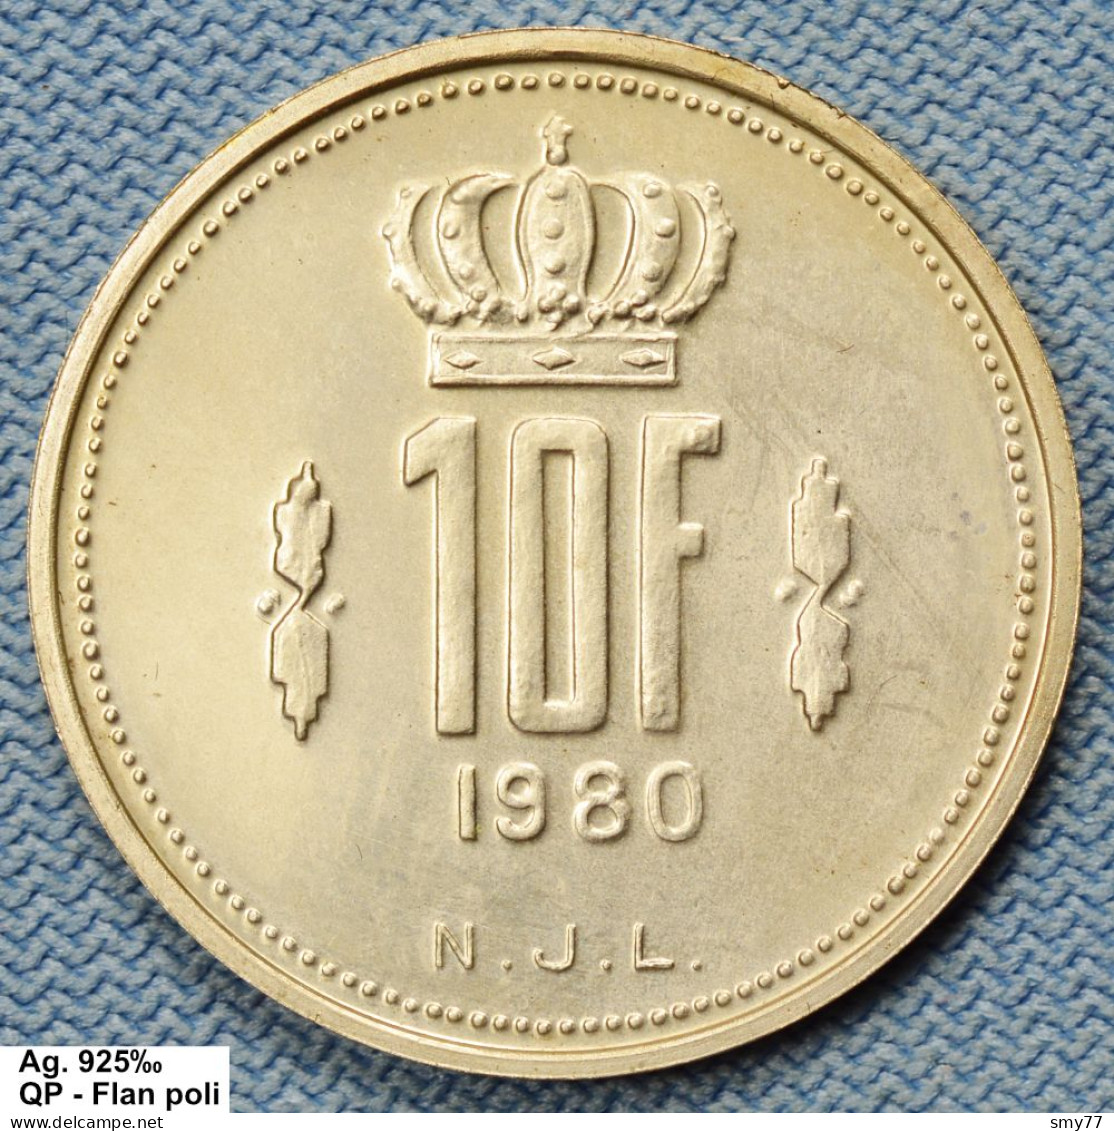 Luxembourg • 10 Francs 1980  Argent / Silver 925‰ (Jean) •  QP / Flan Poli  •  3'000 Ex.  • Rare •  [24-464] - Luxembourg